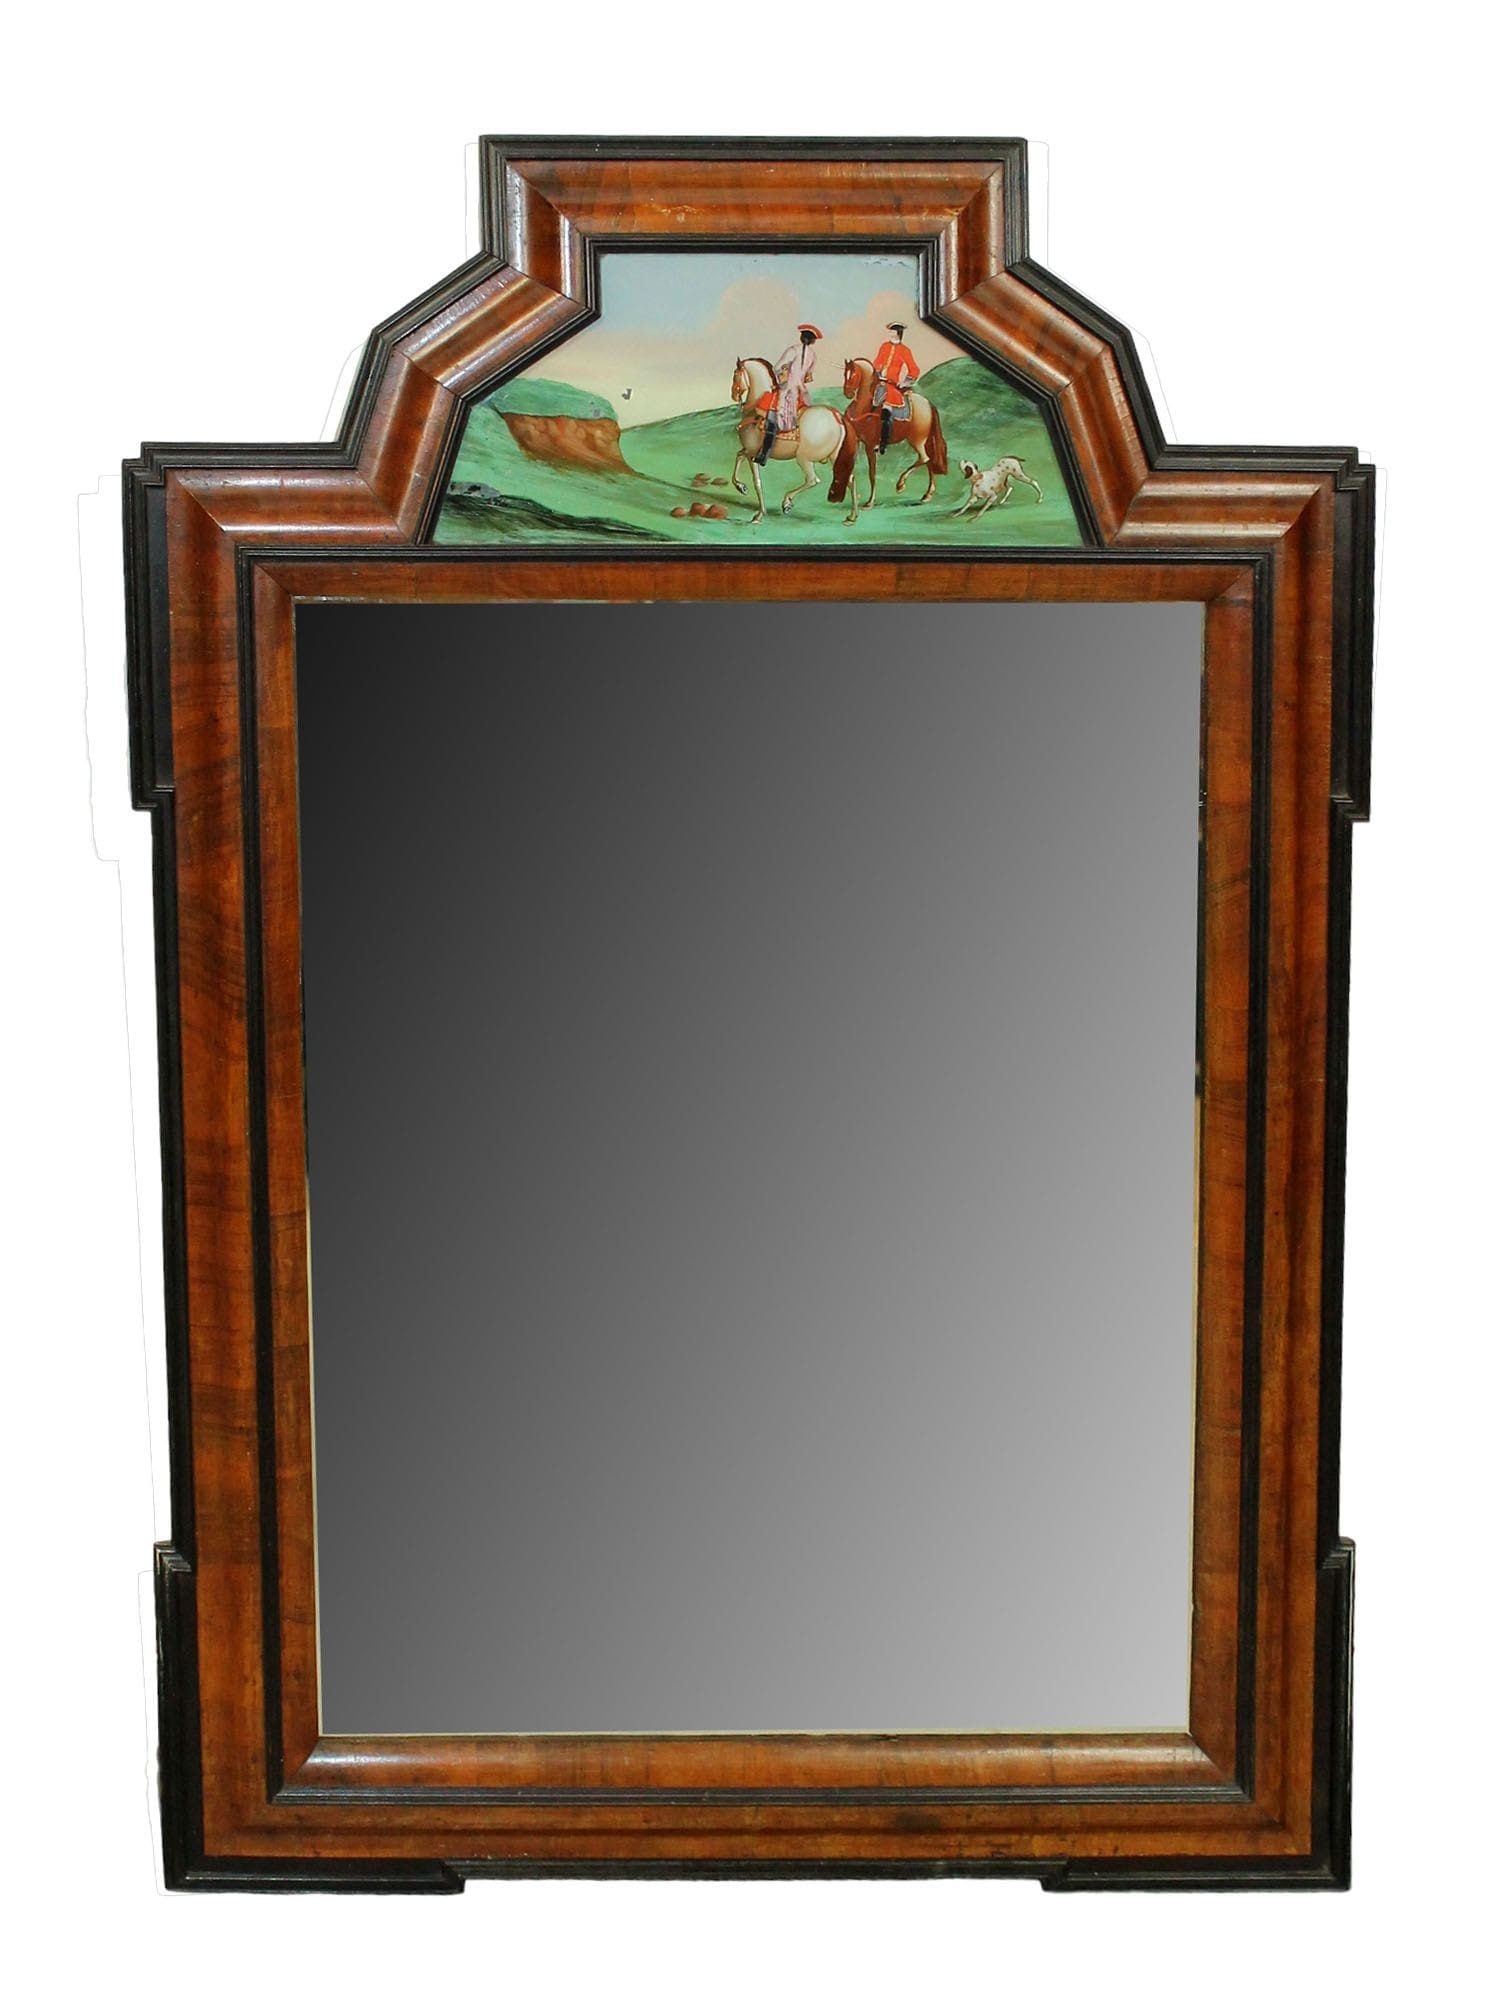 English courting mirror with reverse painting on glass